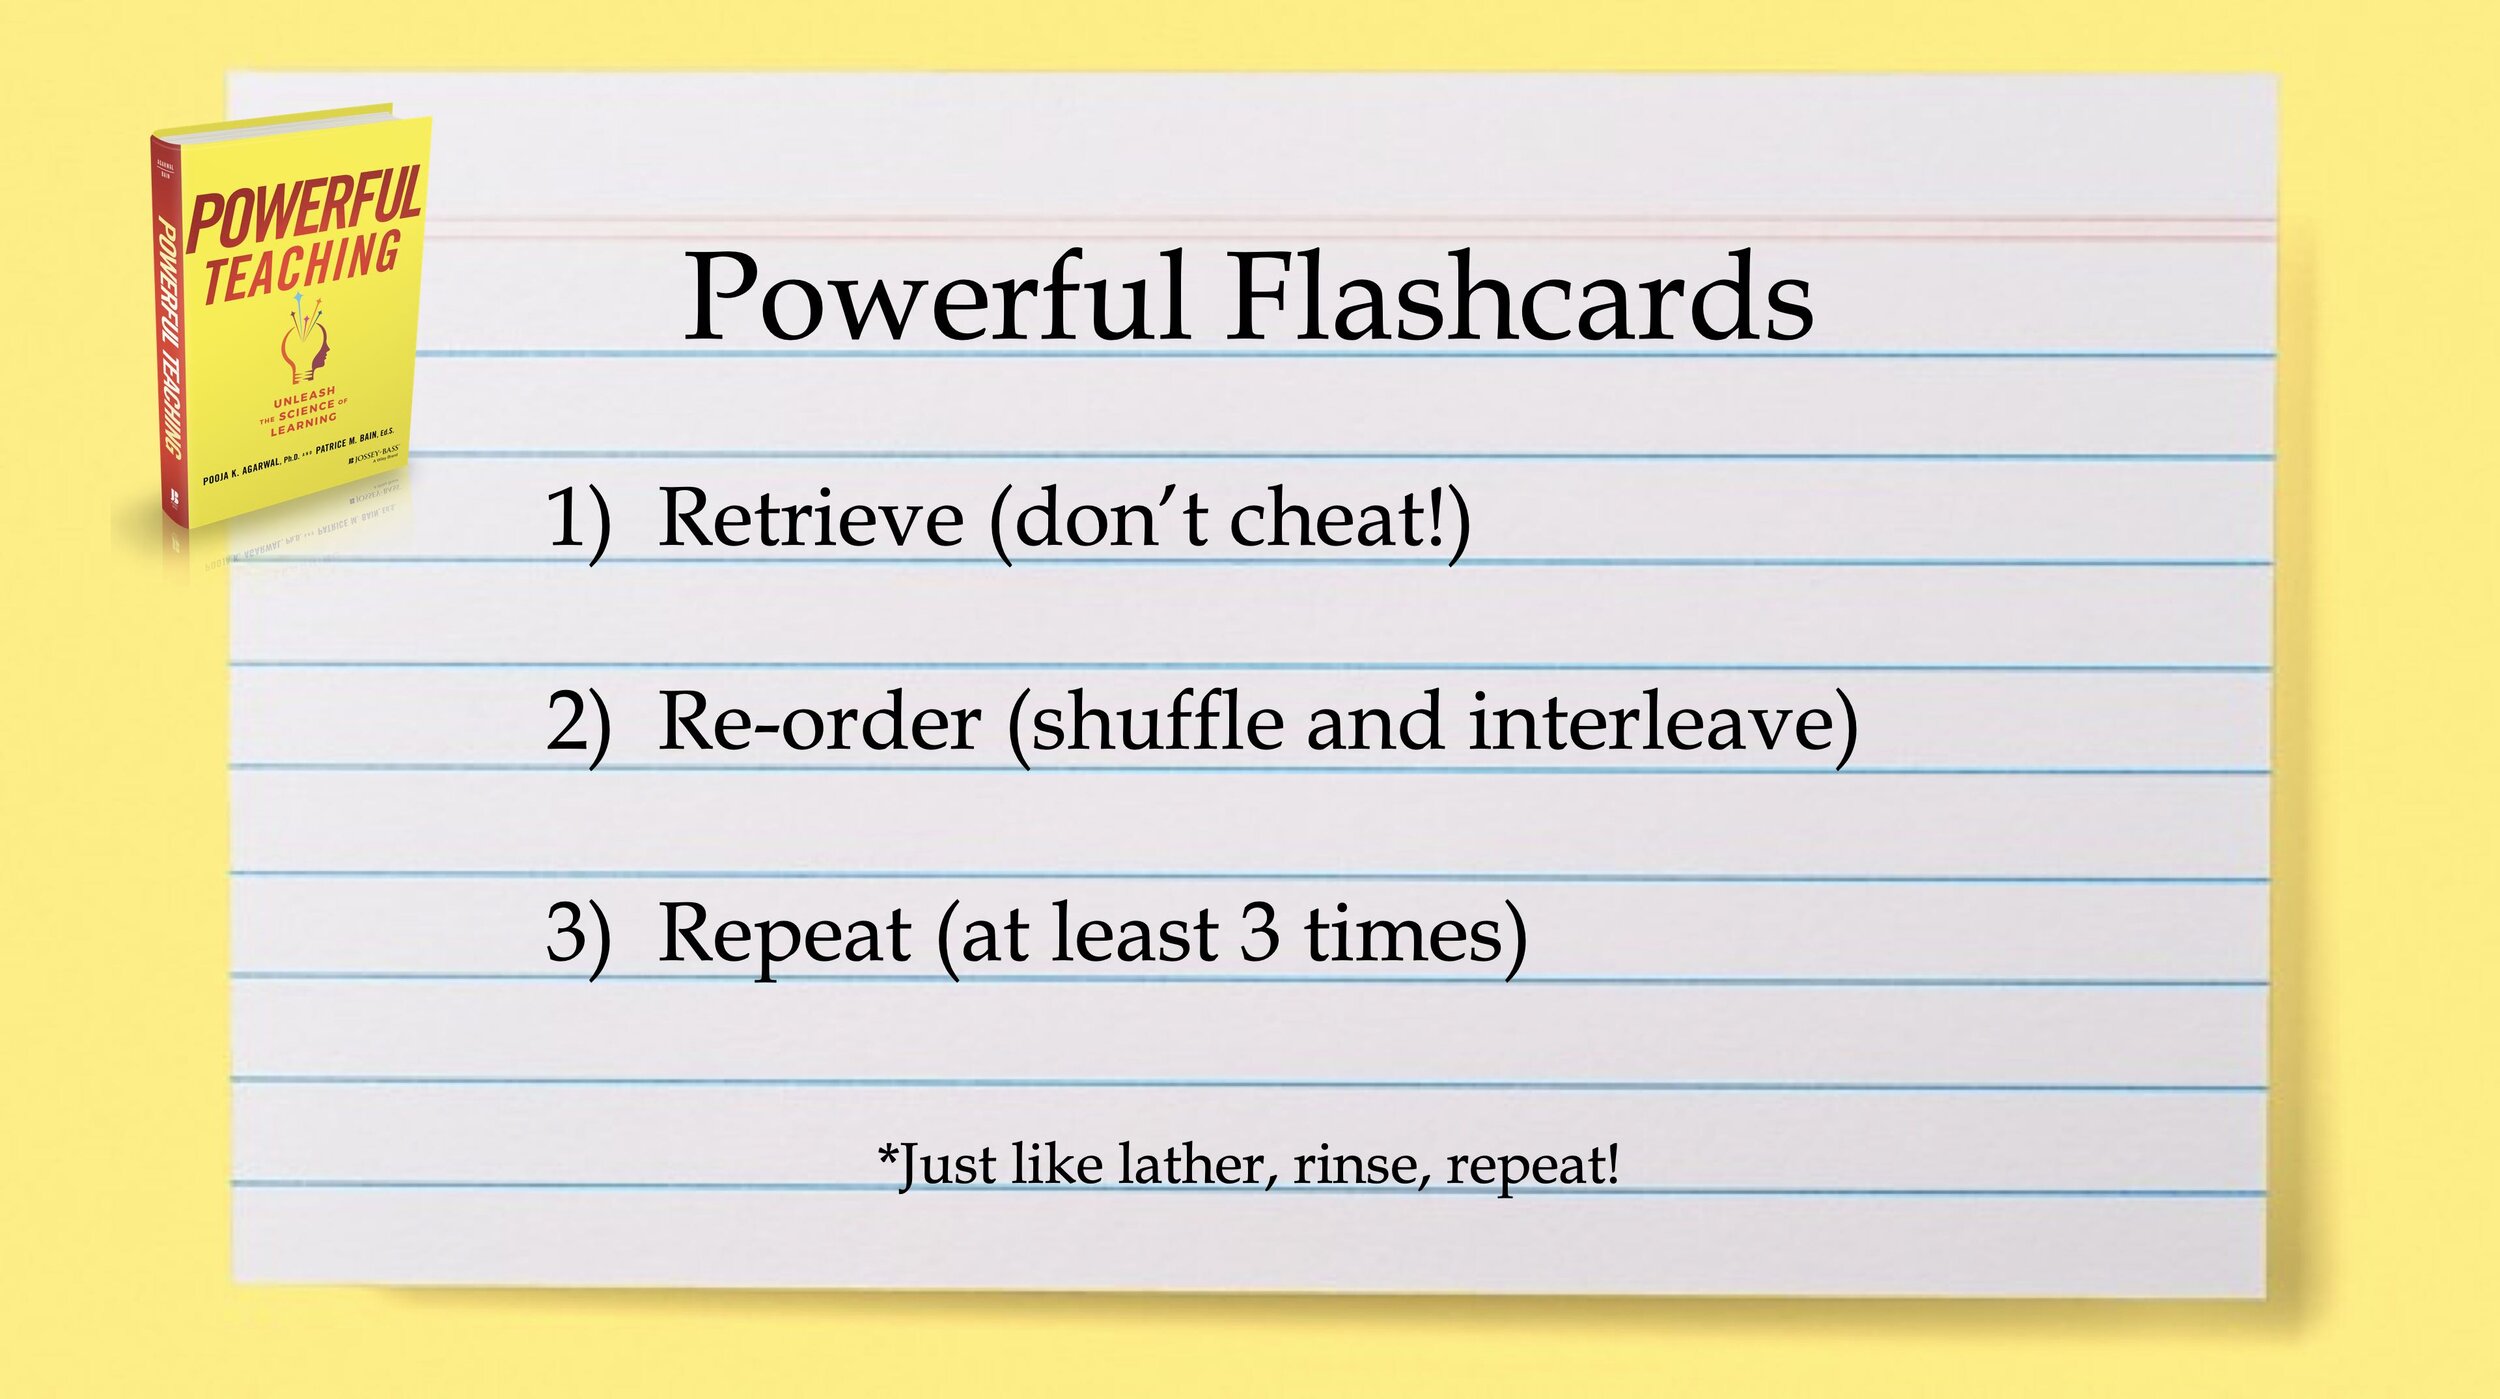 Make flashcards more powerful with these 3 tips – Retrieval Practice